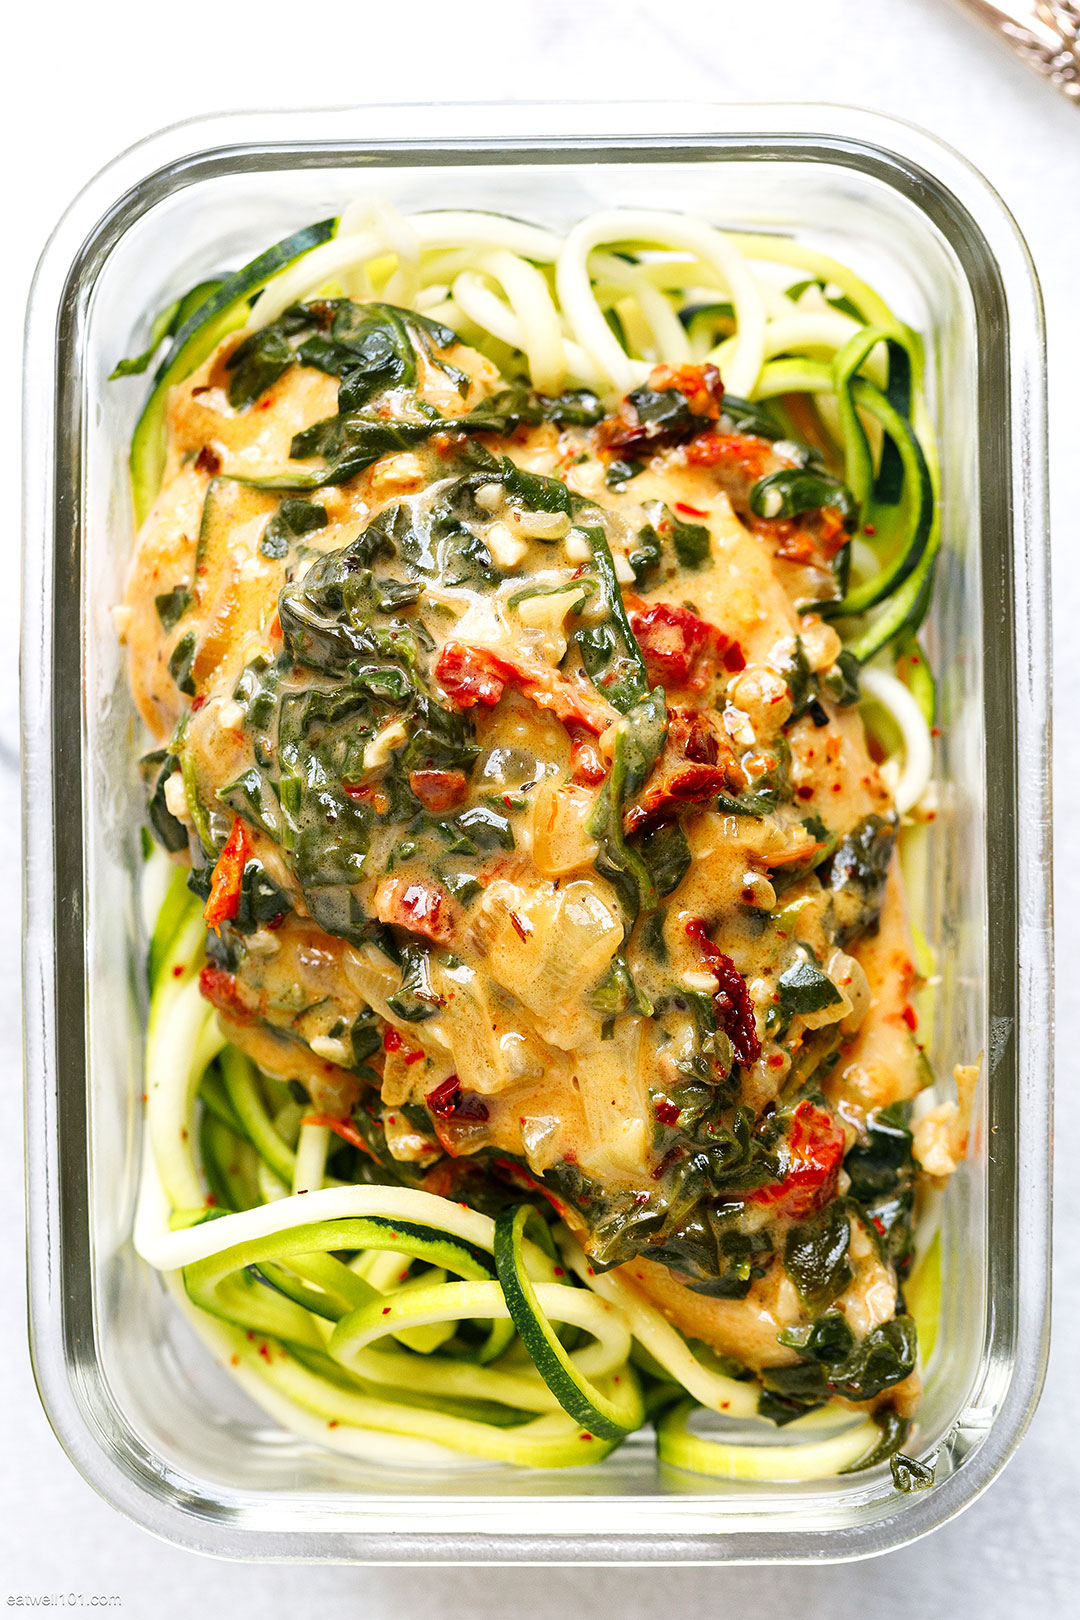 Creamy Spinach Chicken Meal Prep Recipe With Zucchini Noodles Chicken Meal Prep Recipe Eatwell101